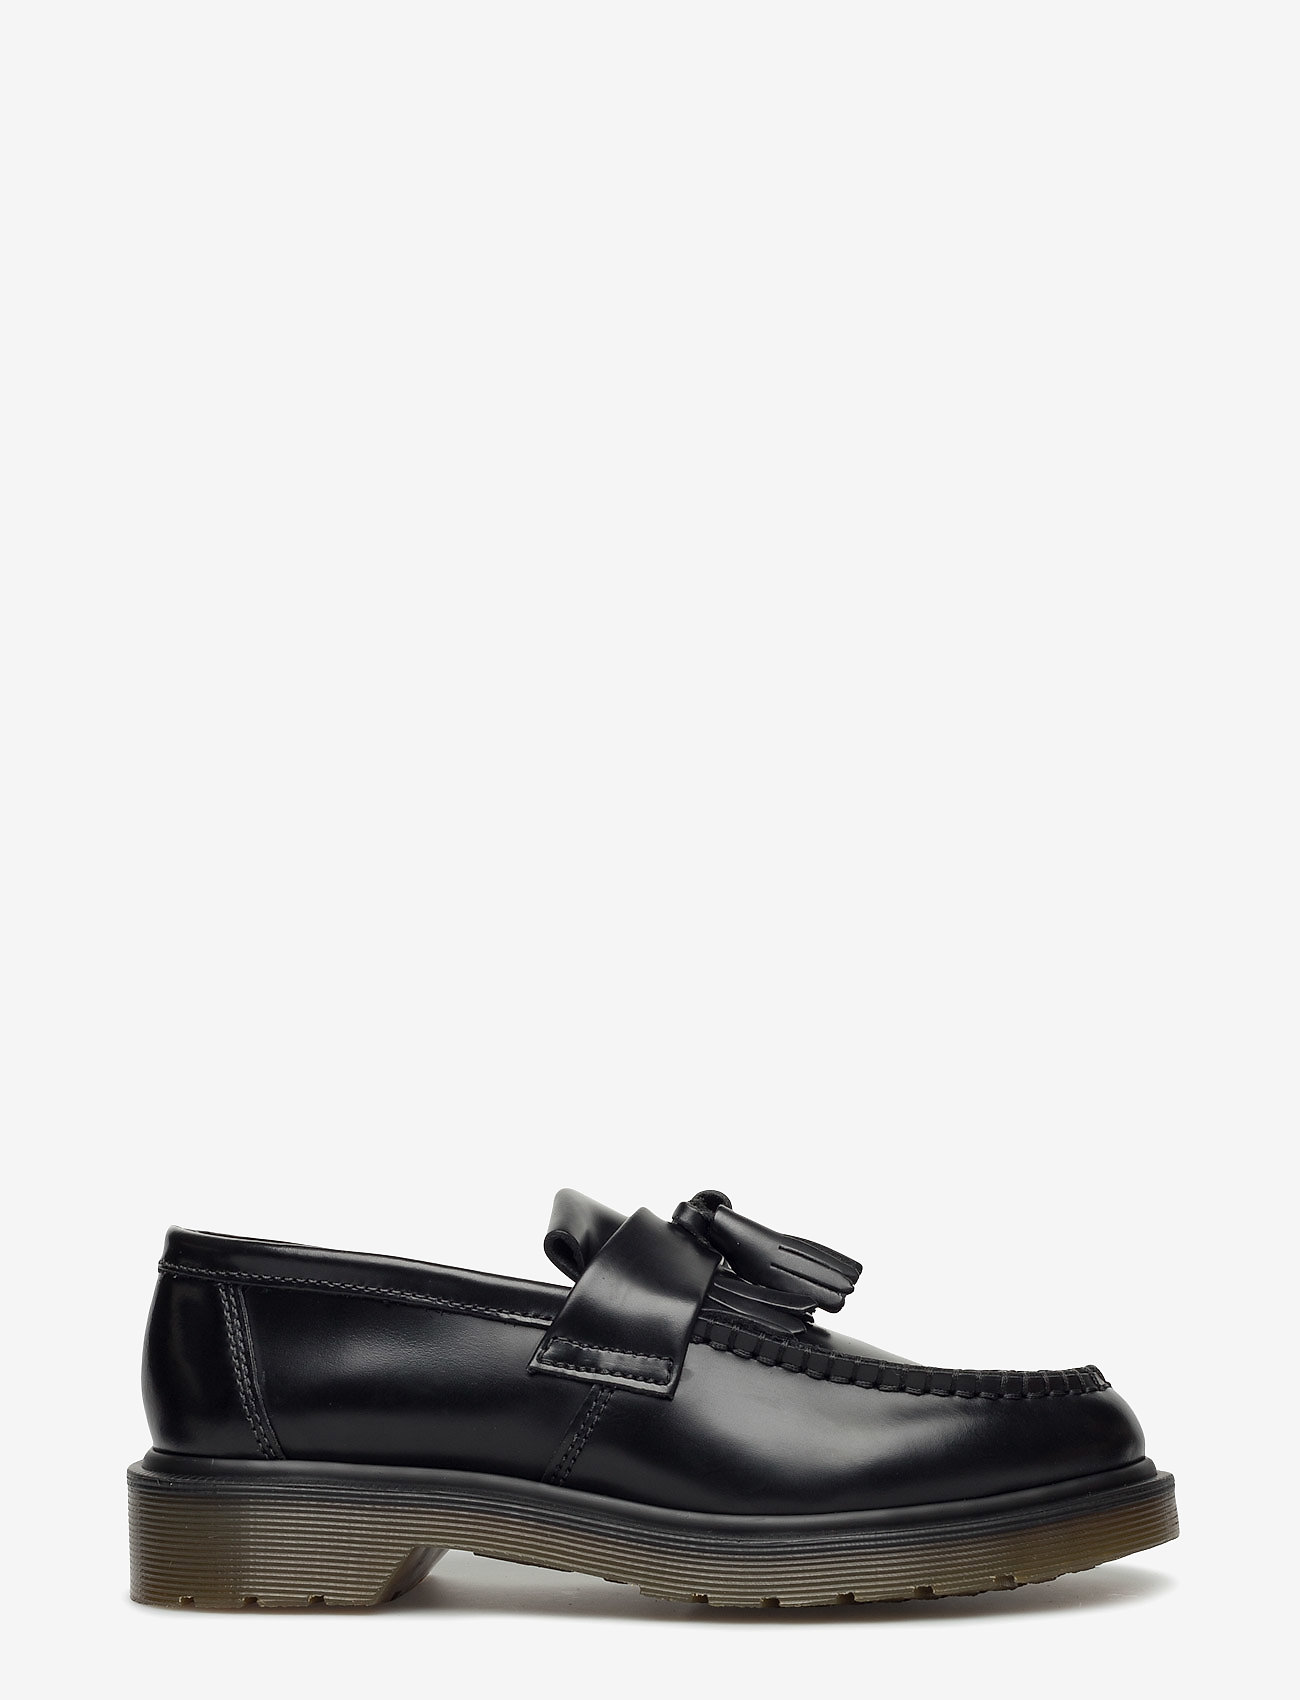 Dr. Martens - Adrian Black Polished Smooth - chaussures plates - black - 1